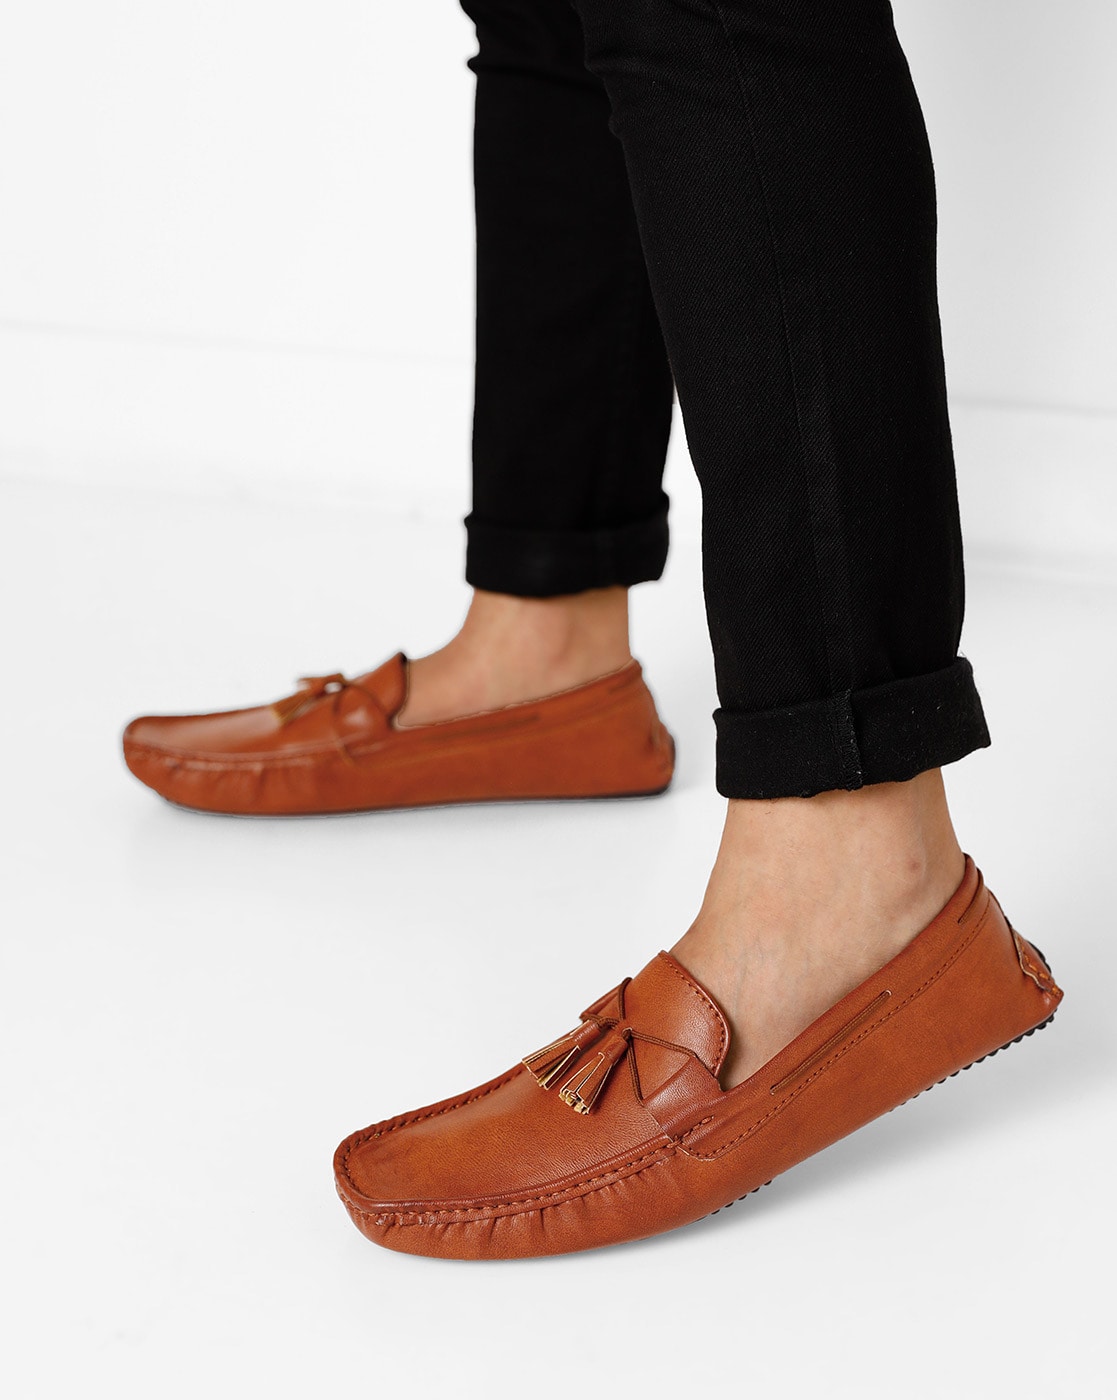 tan color loafer shoes